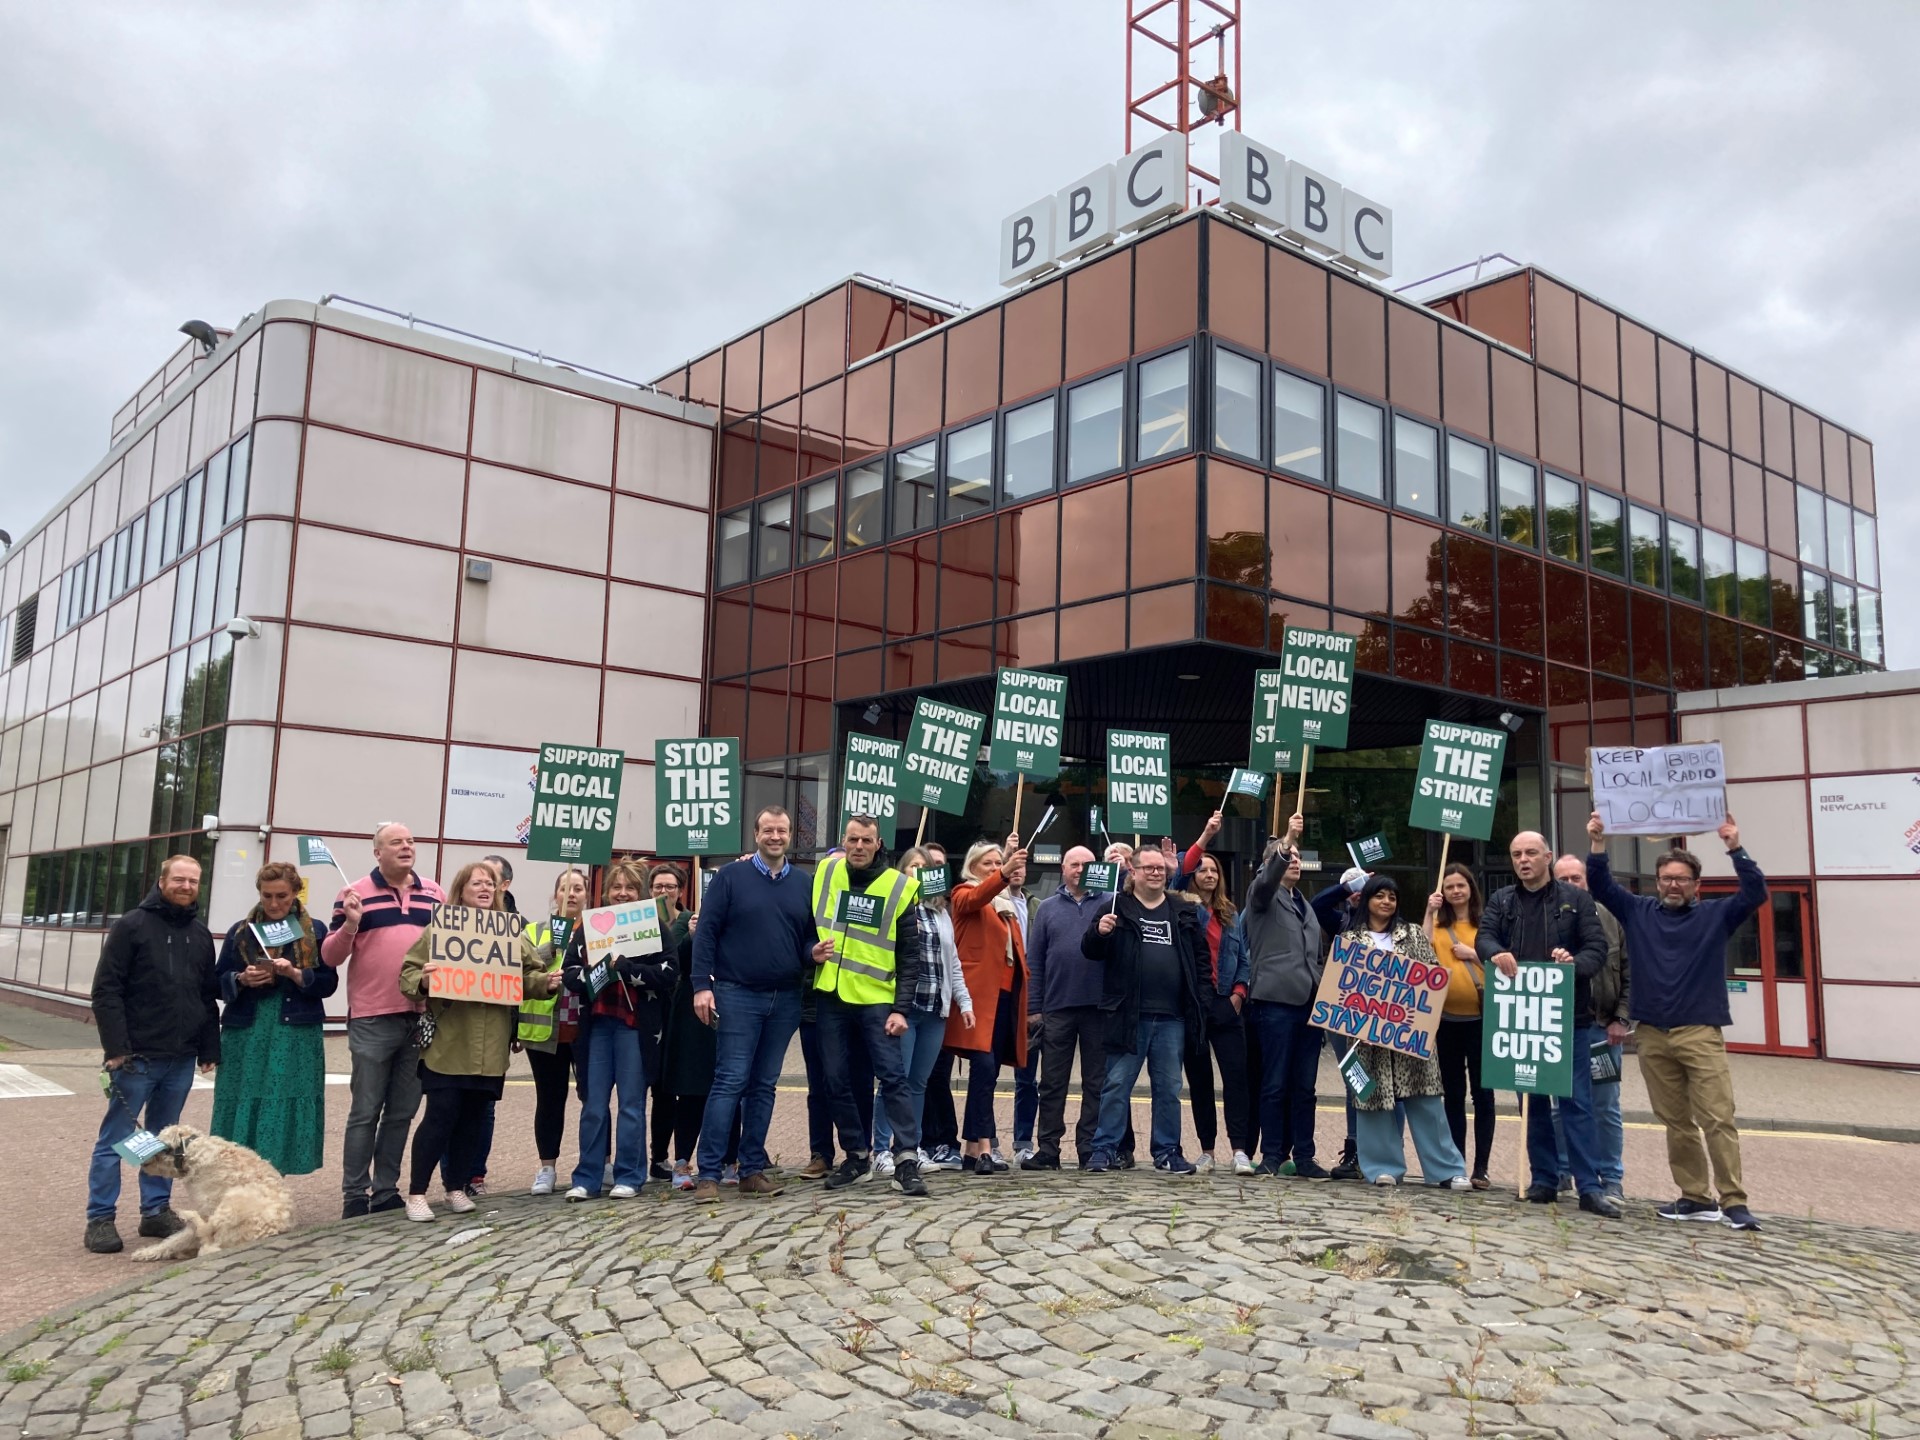 Large NUJ picket line at BBS Newcastle with placards